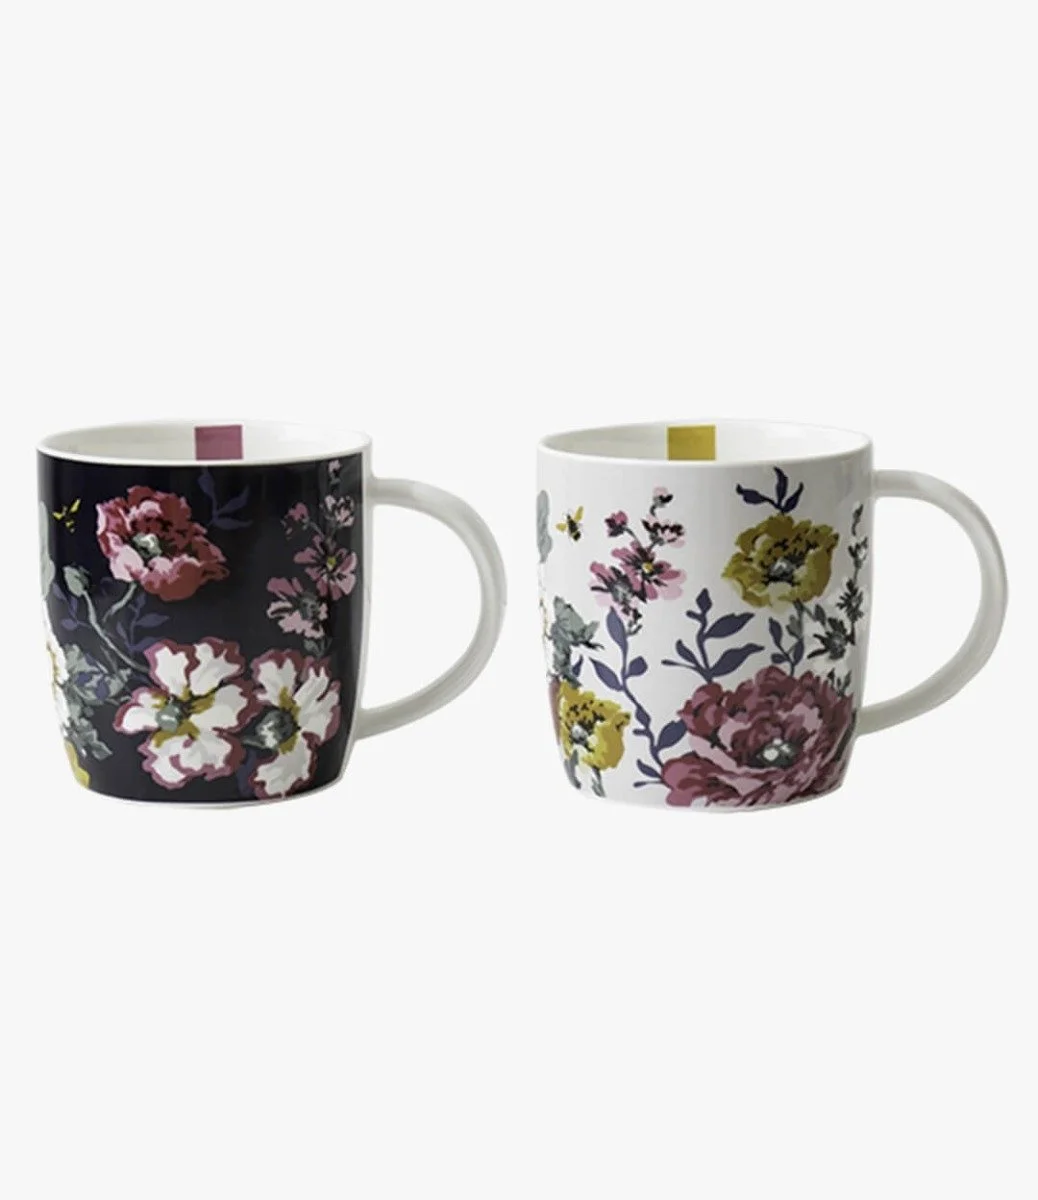 2 x Mug Set in Gift Box by Joules